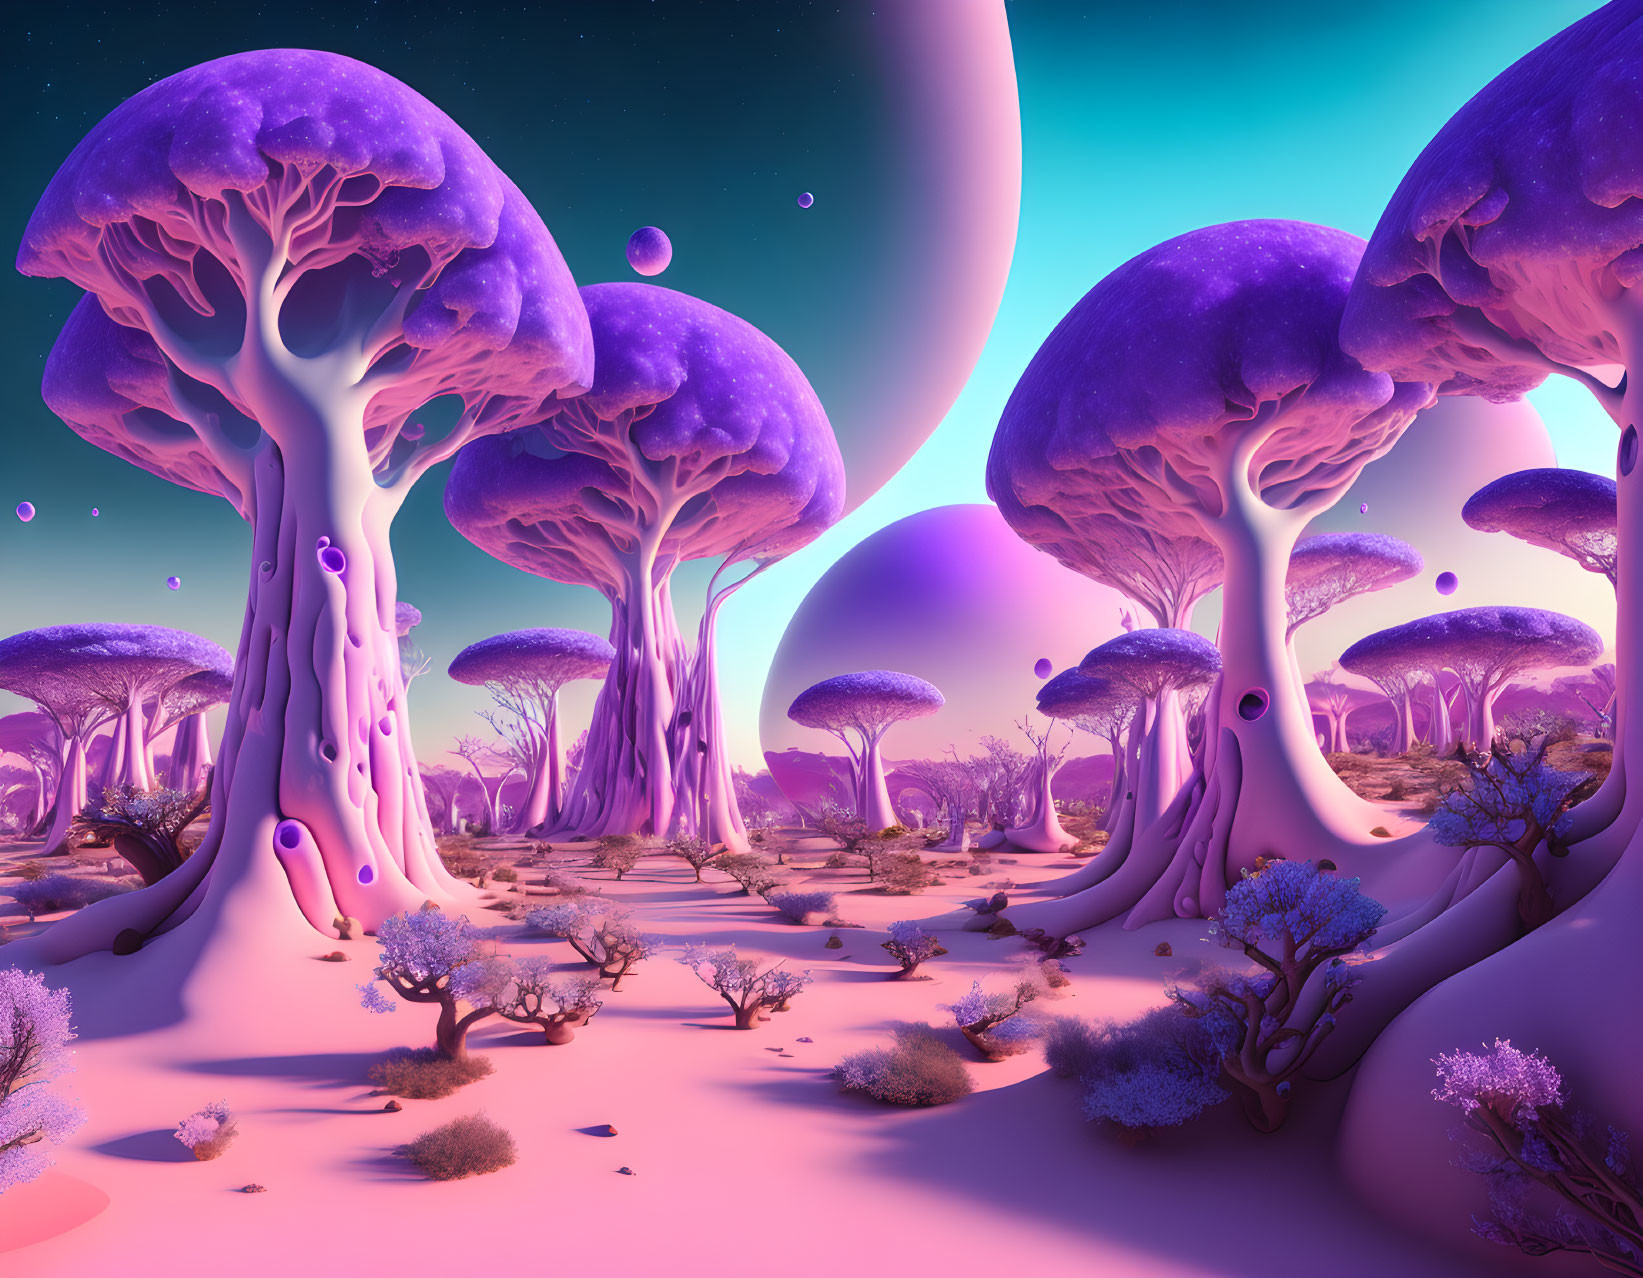 Colorful alien landscape with giant purple mushroom trees and pink sky.